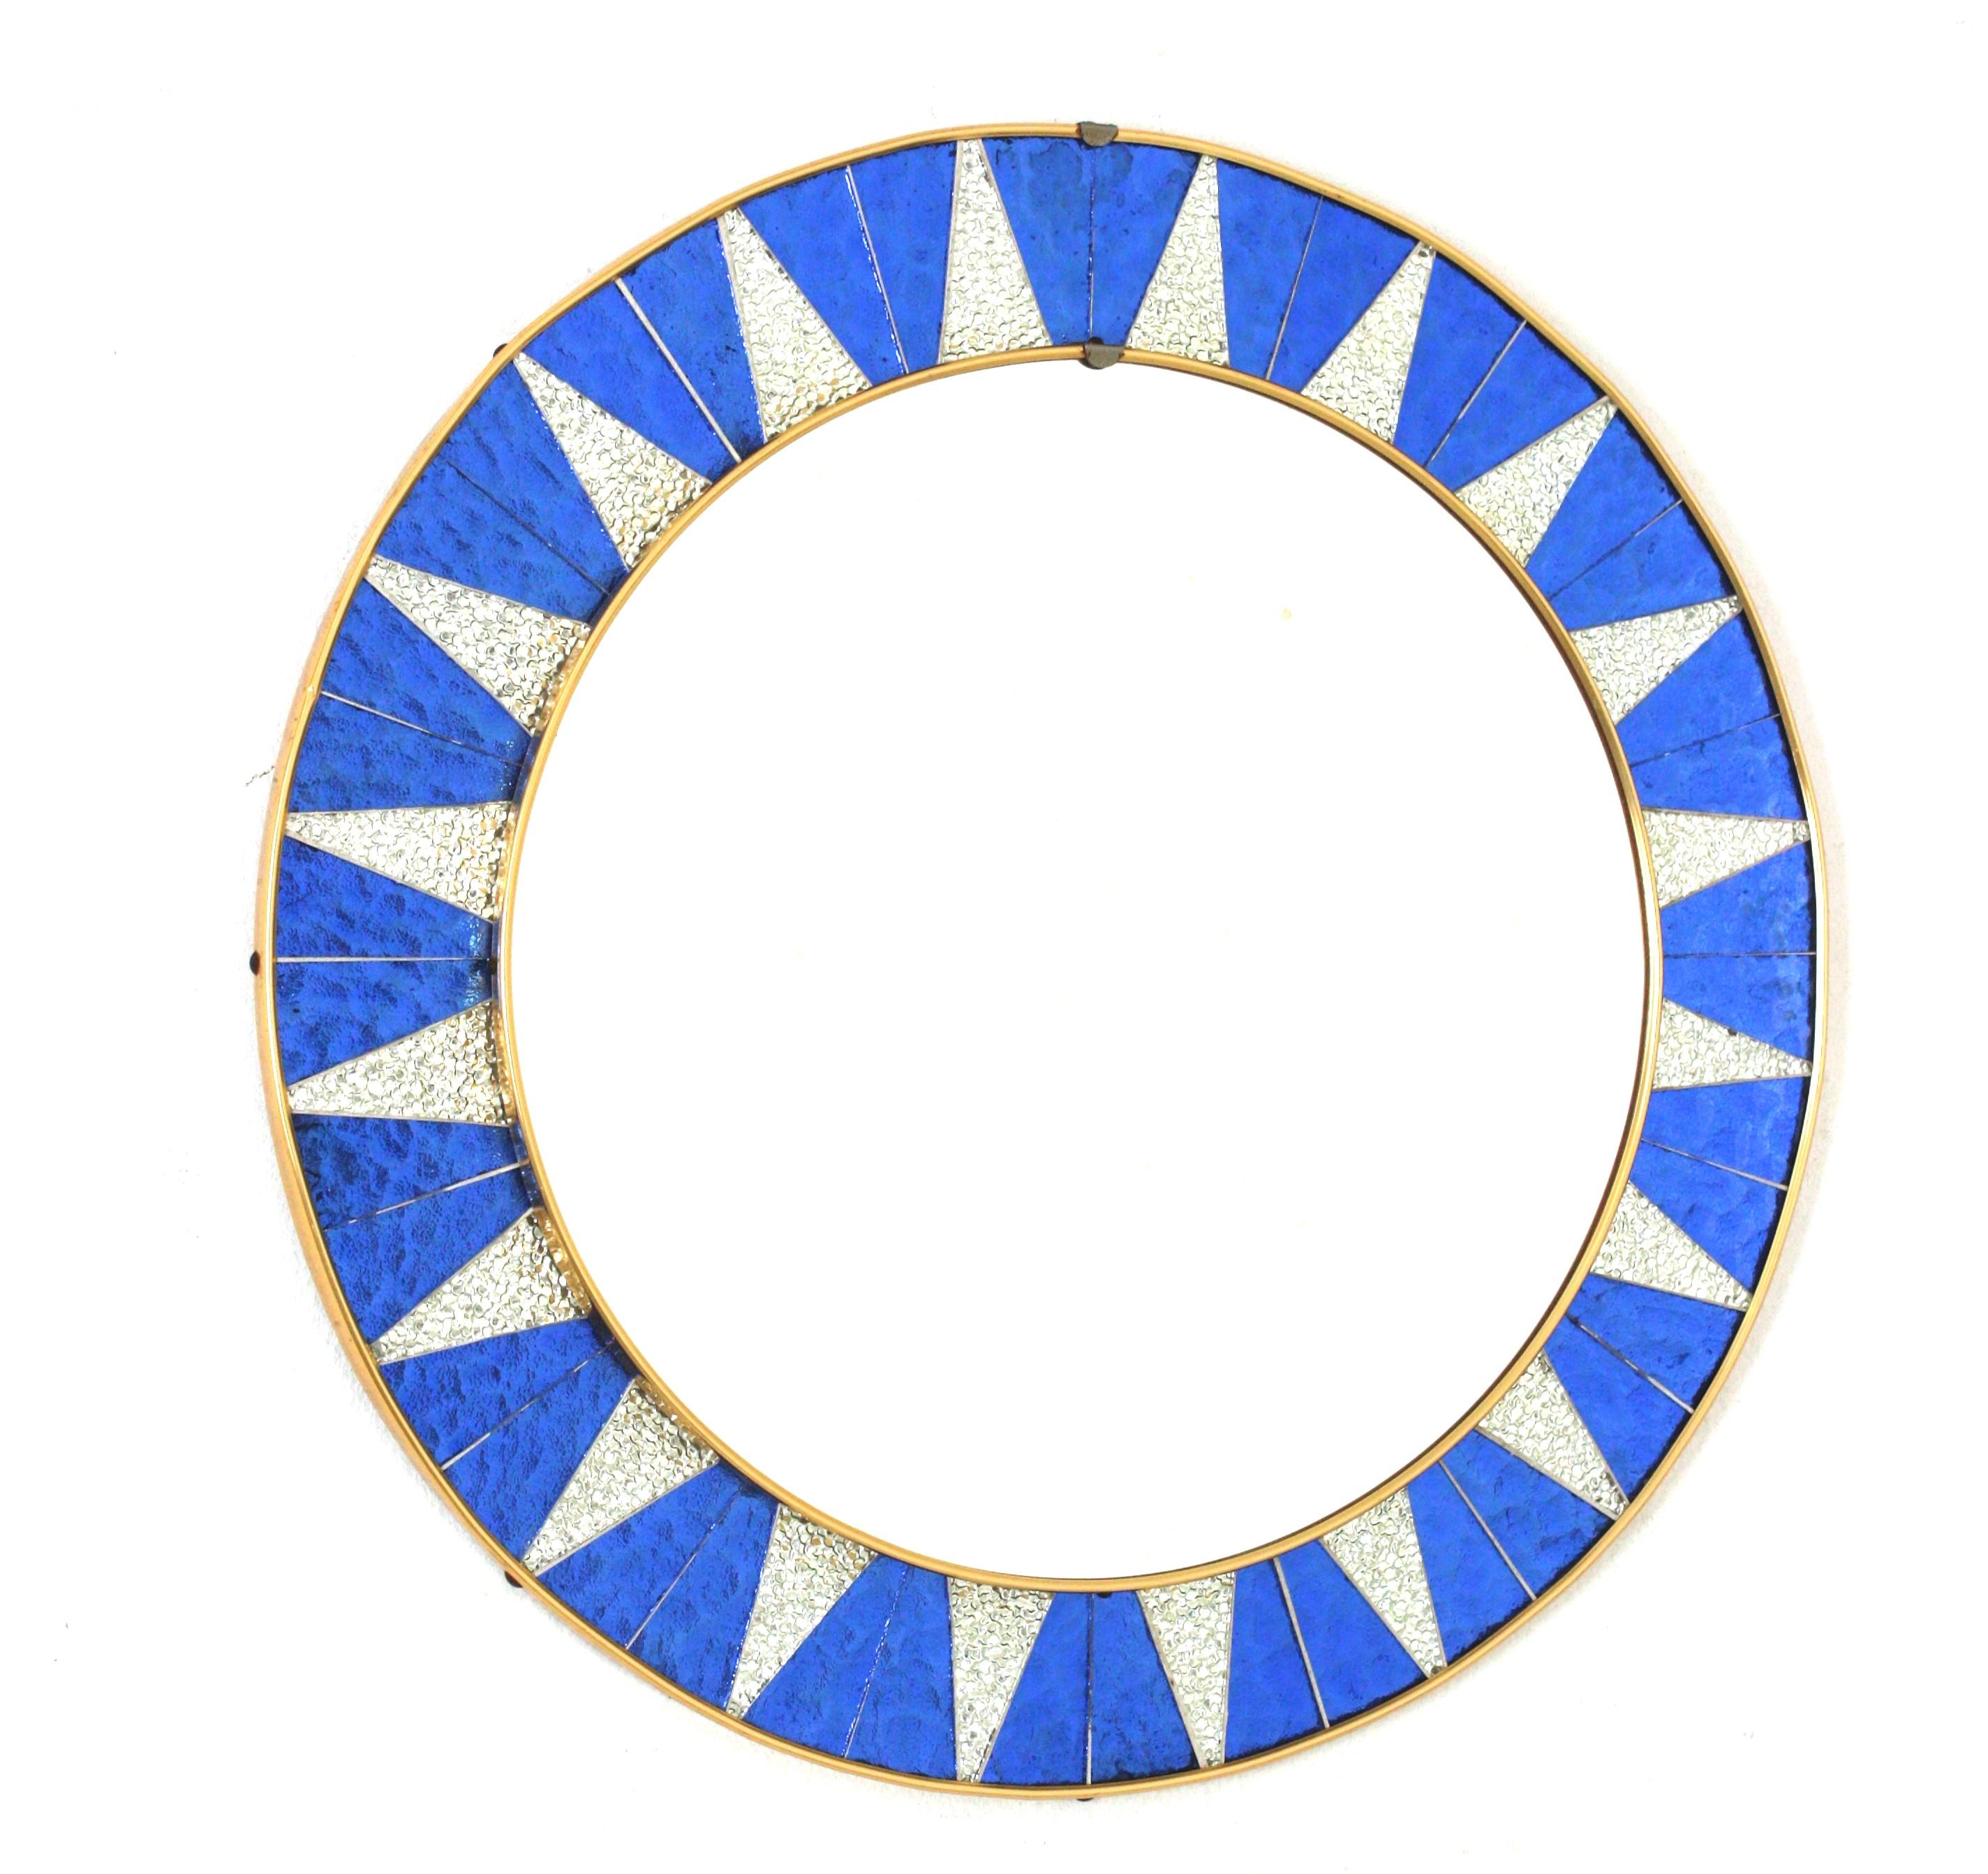 Midcentury Round Sunburst Mosaic Mirror, 
A highly decorative Mid-Century Modern circular mirror with a frame composed by pieces of textured glass silvered mirrors and iridiscent blue glasses distributed creating a sunburst pattern. Spain, circa